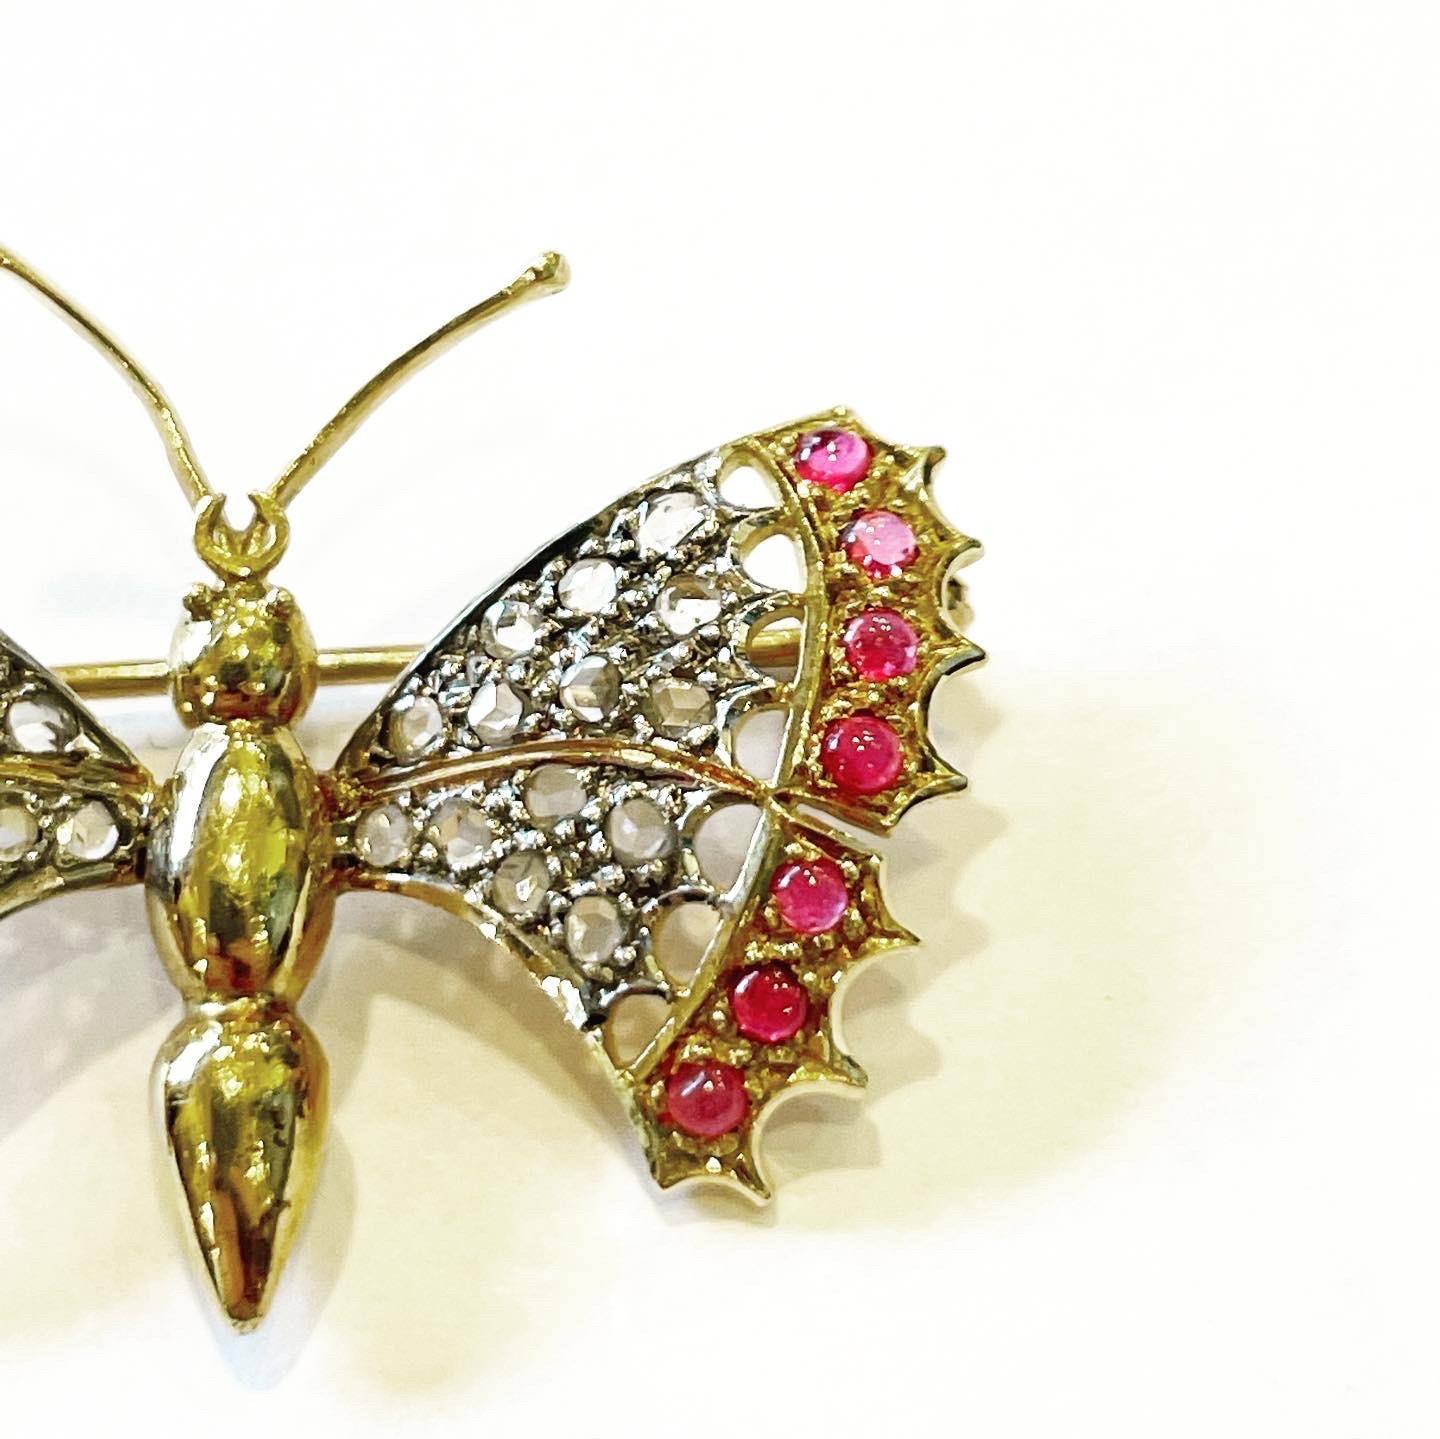 Amazing butterfly brooch with pave set with Diamonds and ruby cabochon .
Handmade 18k Yellow and White Gold.
Total diamonds: 0.56 carats.
Total ruby: 0.28 carats.
Weight: 7.22 gr.
Measure: 3.5 x 3 cm.
In original box. 

FREE SHIPPING .
RETURNS